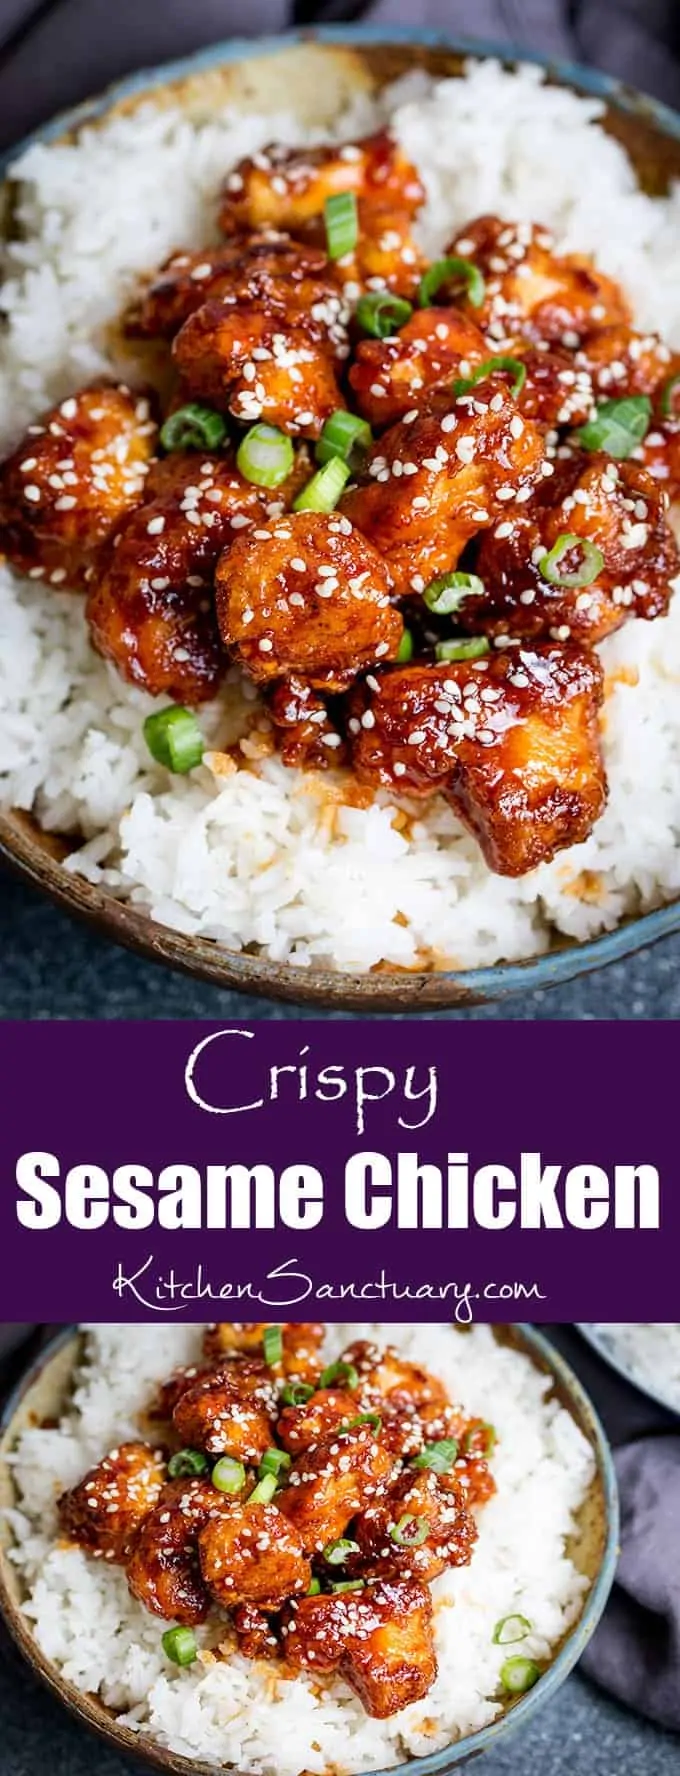 Sesame Chicken that is Crunchy, Nutty and Juicy Inside! – Curated